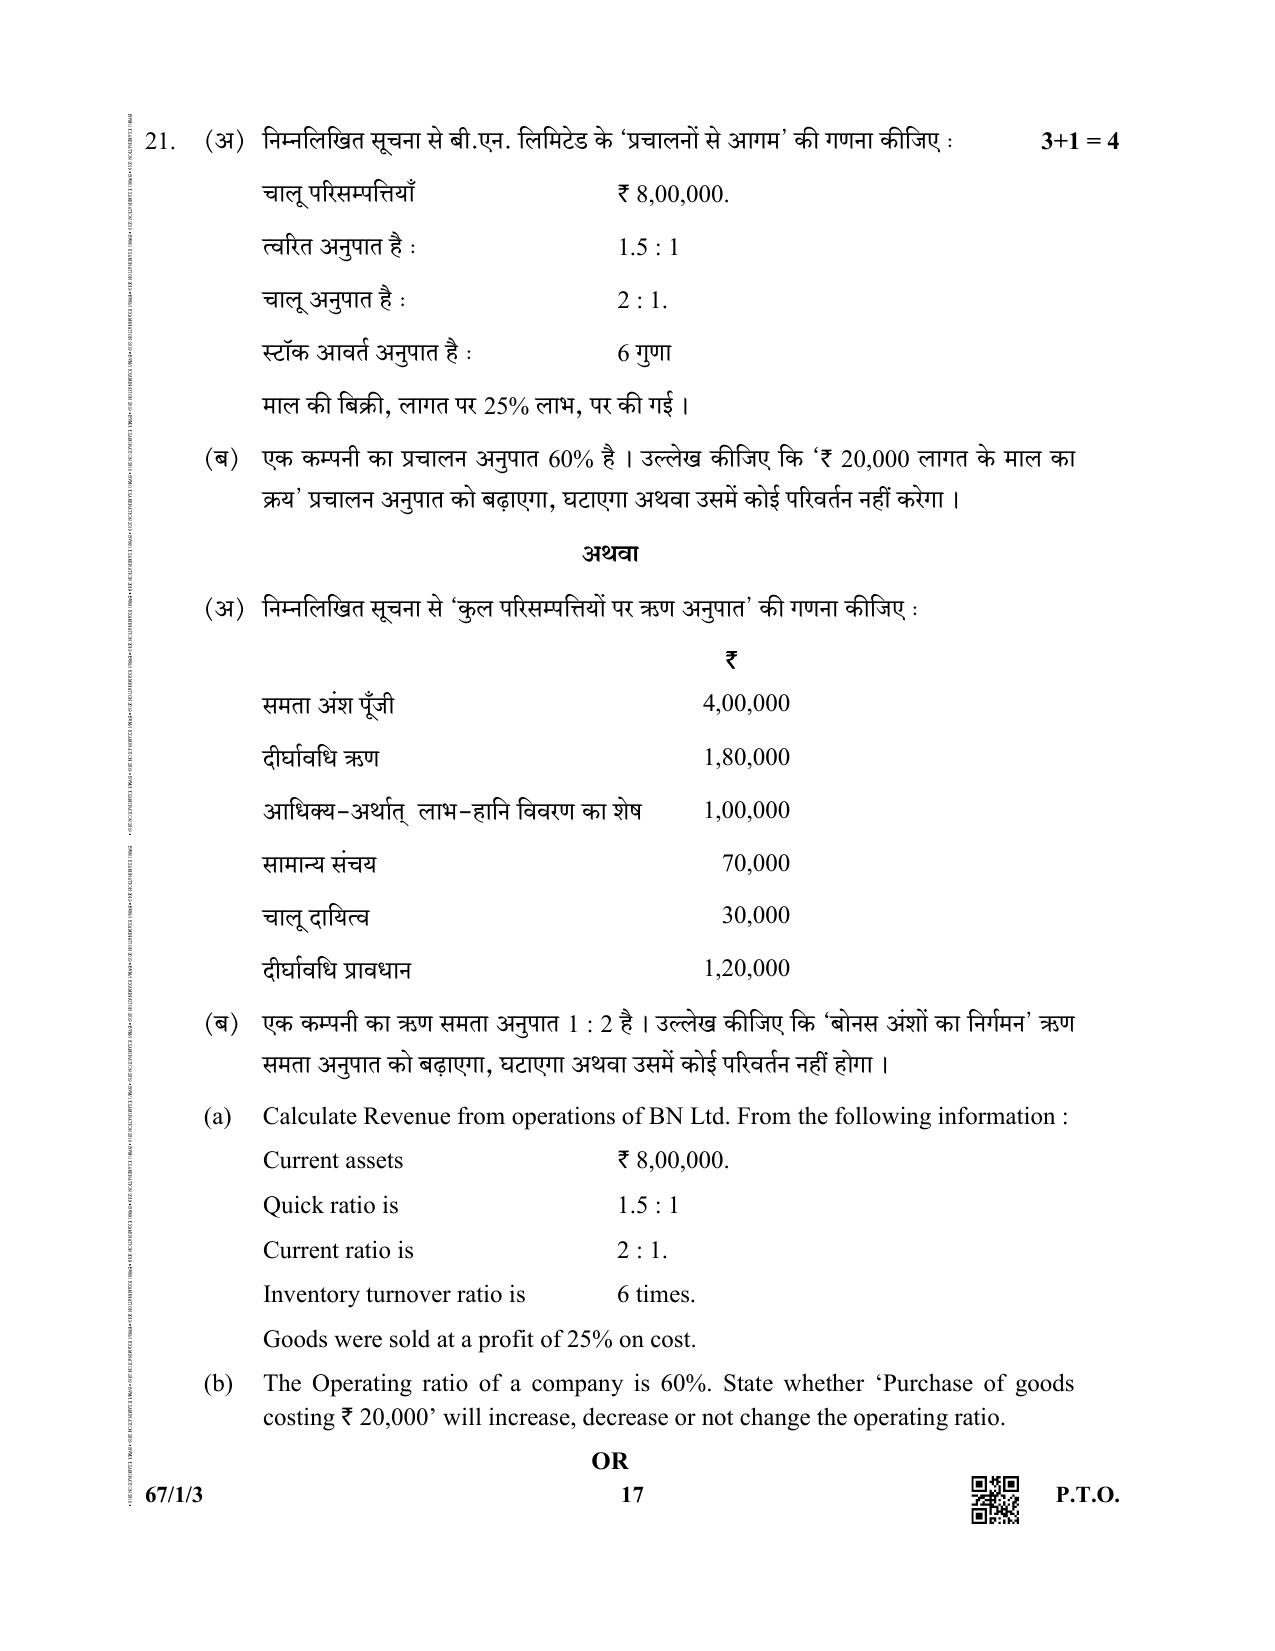 CBSE Class 12 67-1-3  (Accountancy) 2019 Question Paper - Page 17